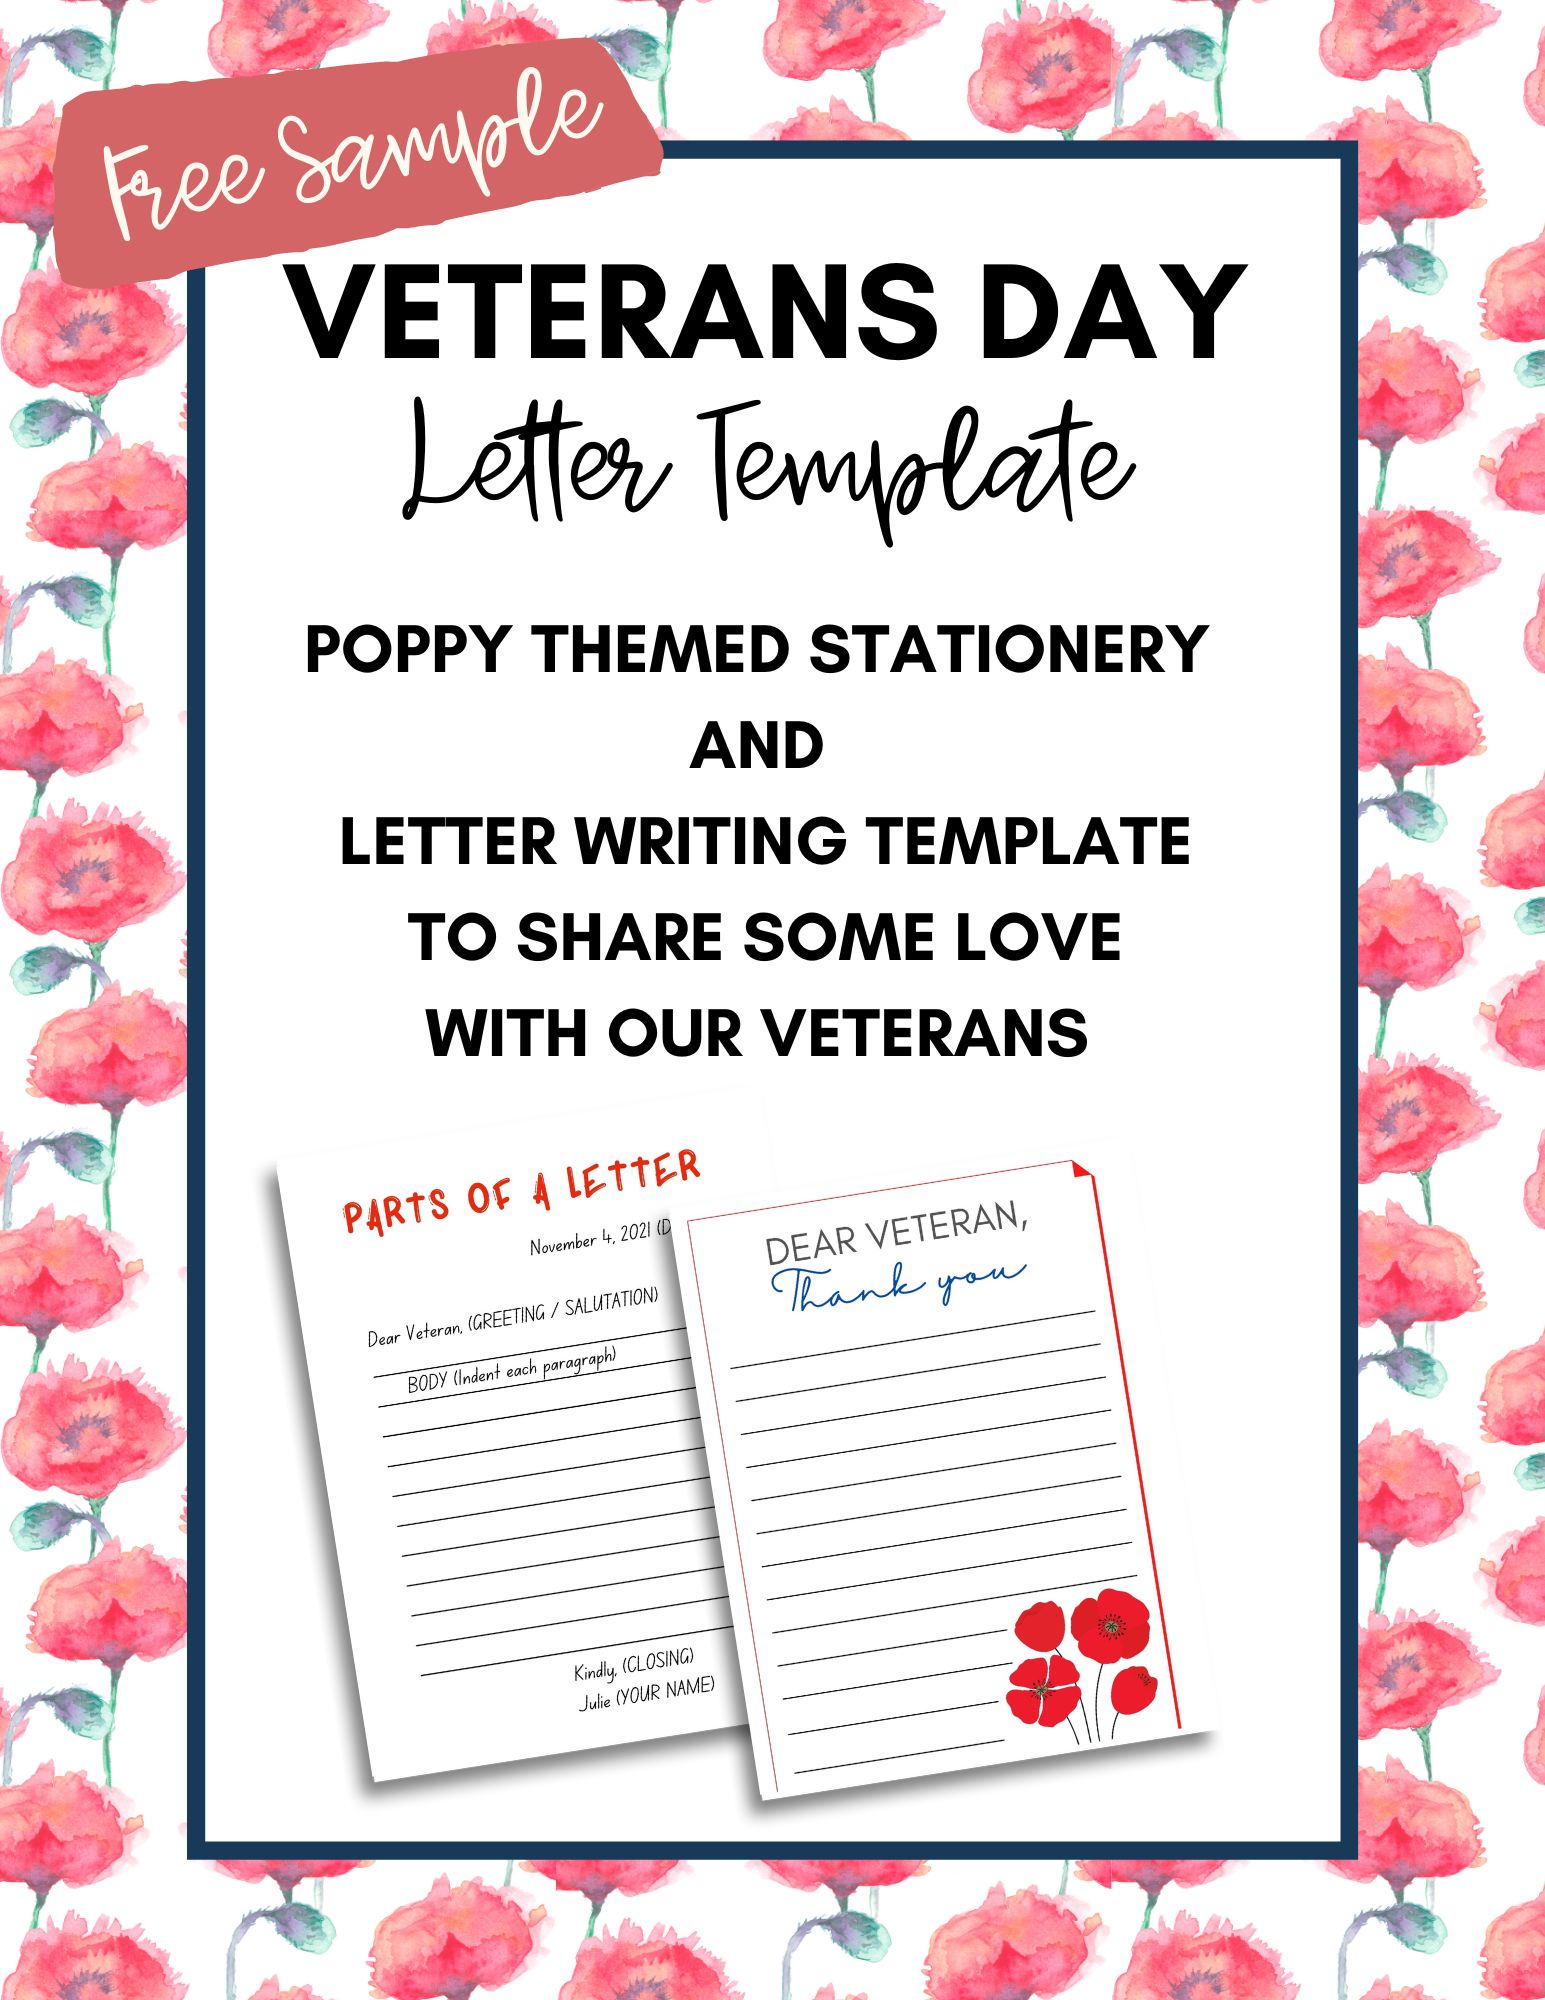 Veterans Day Letter Writing for kids 5 simple ideas + free Video